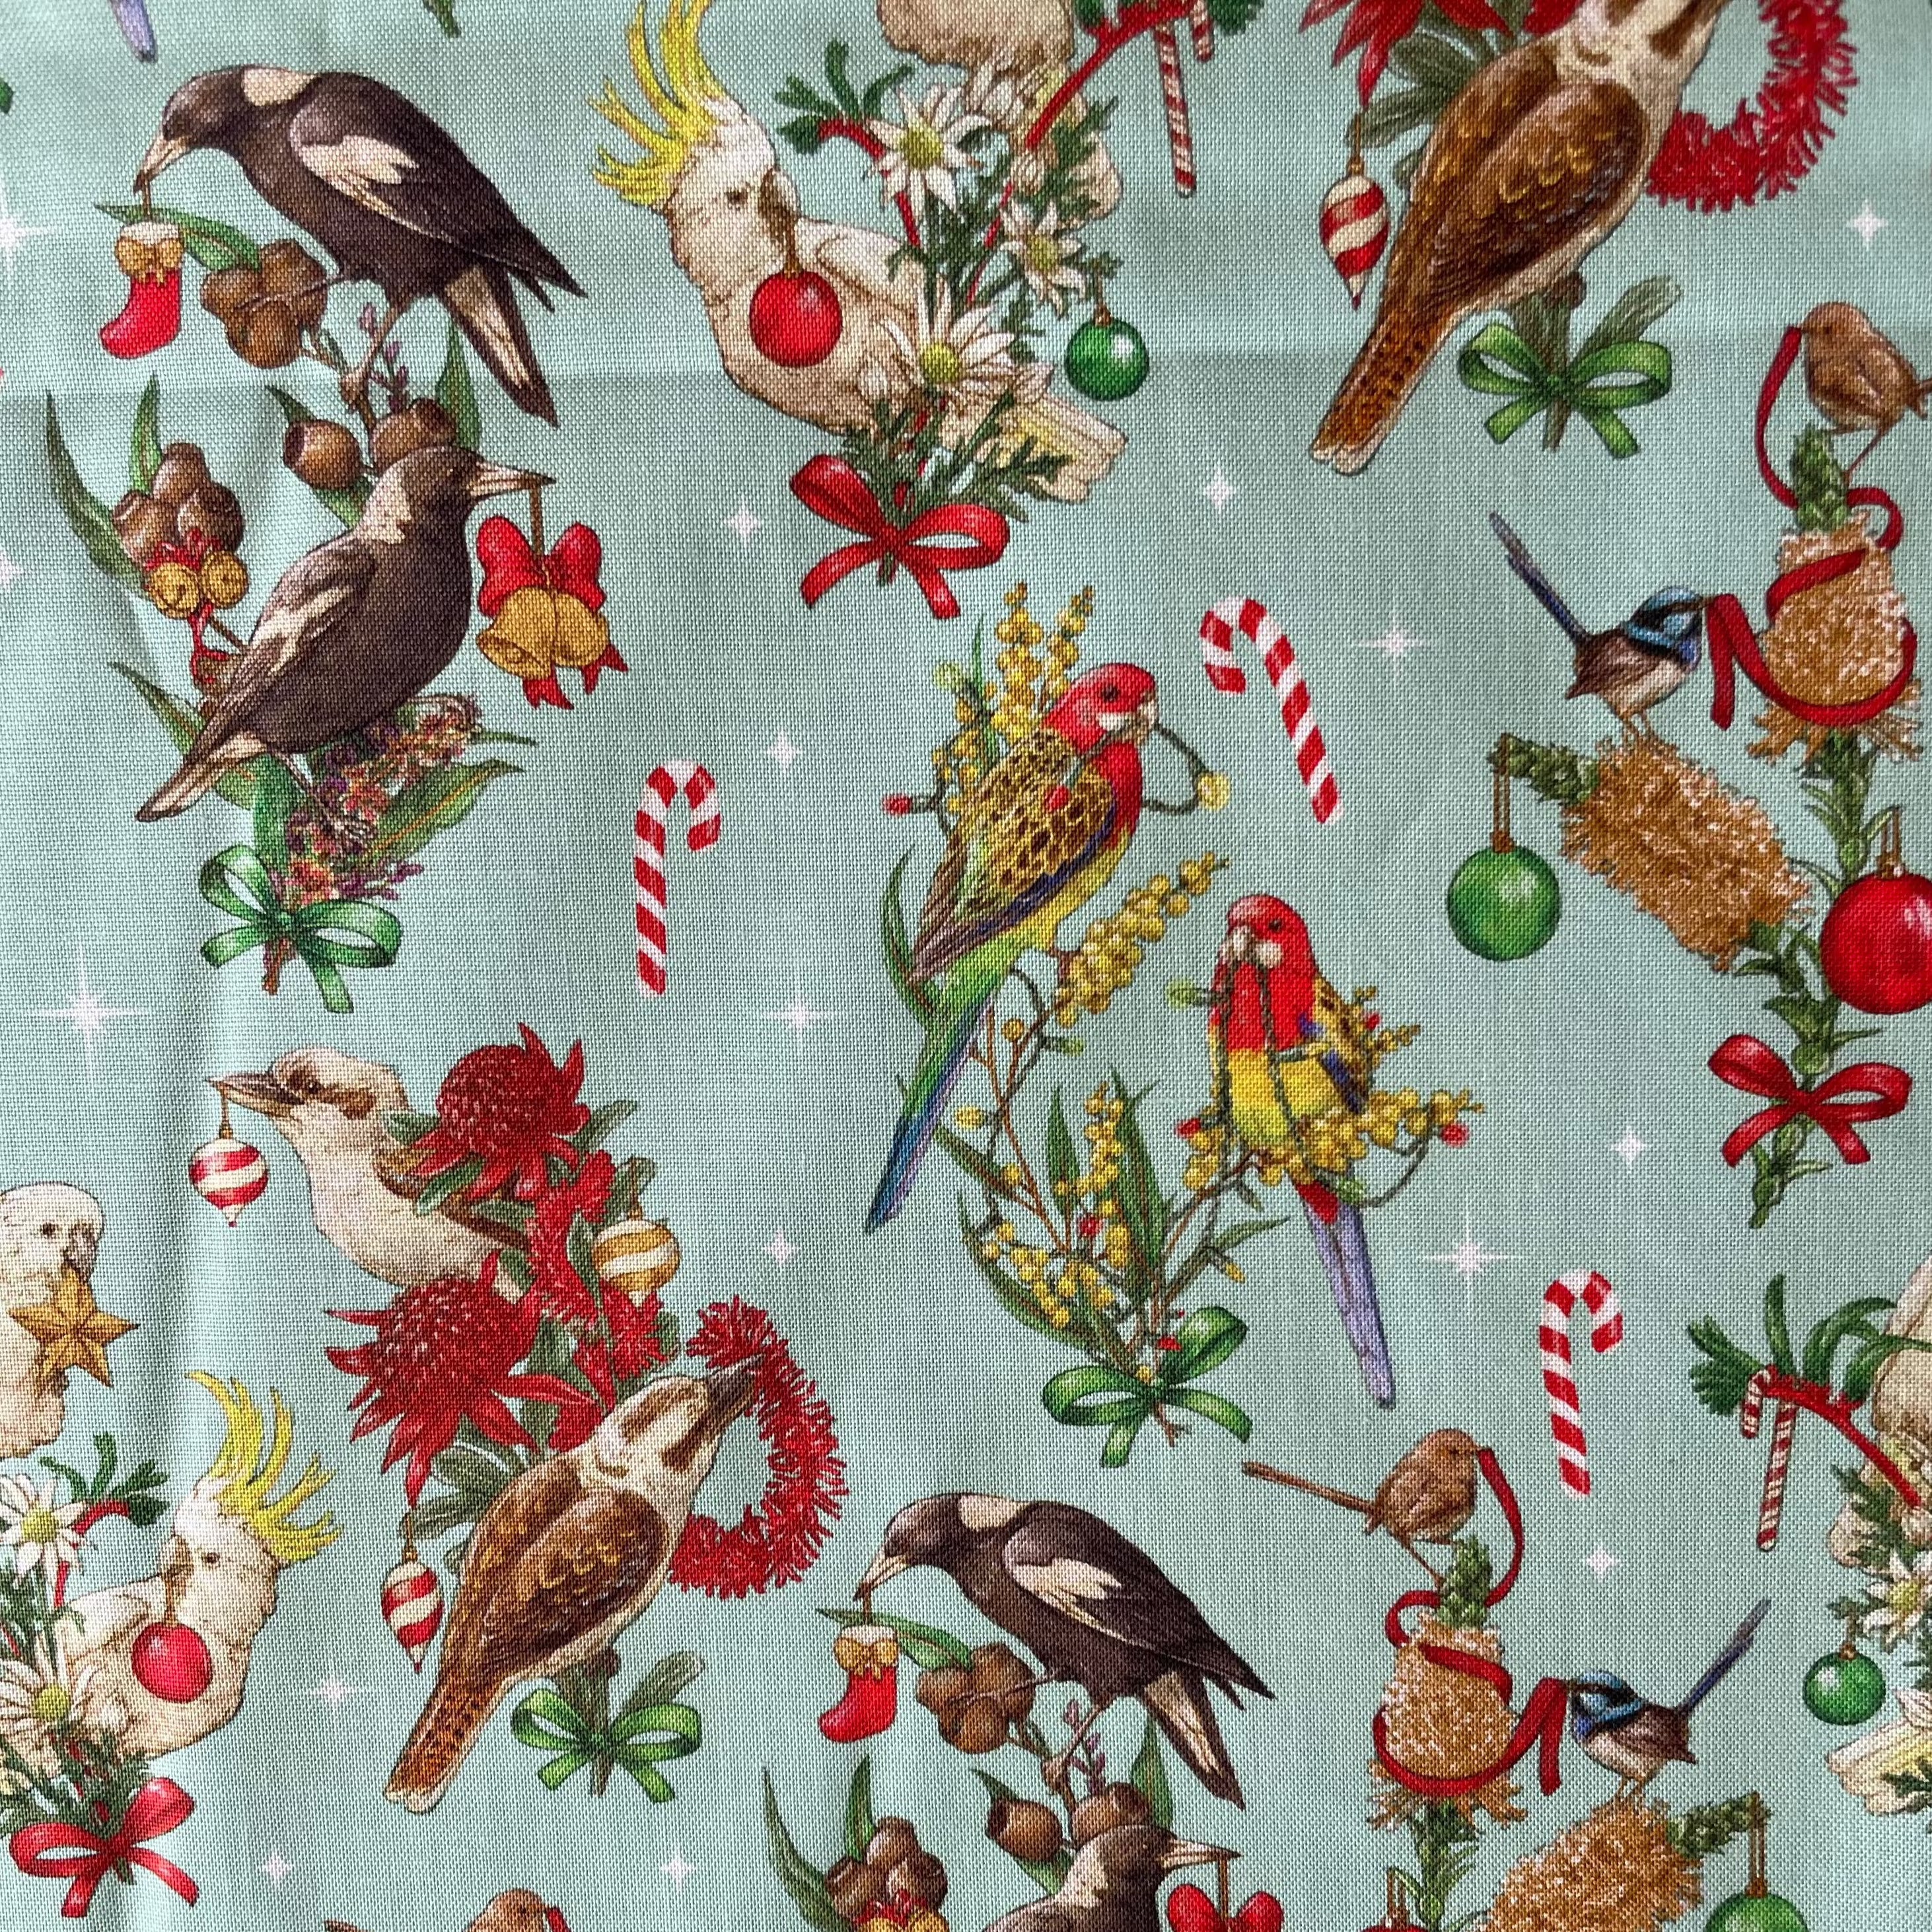 Fabric Gift Wrap - Limited edition Christmas prints